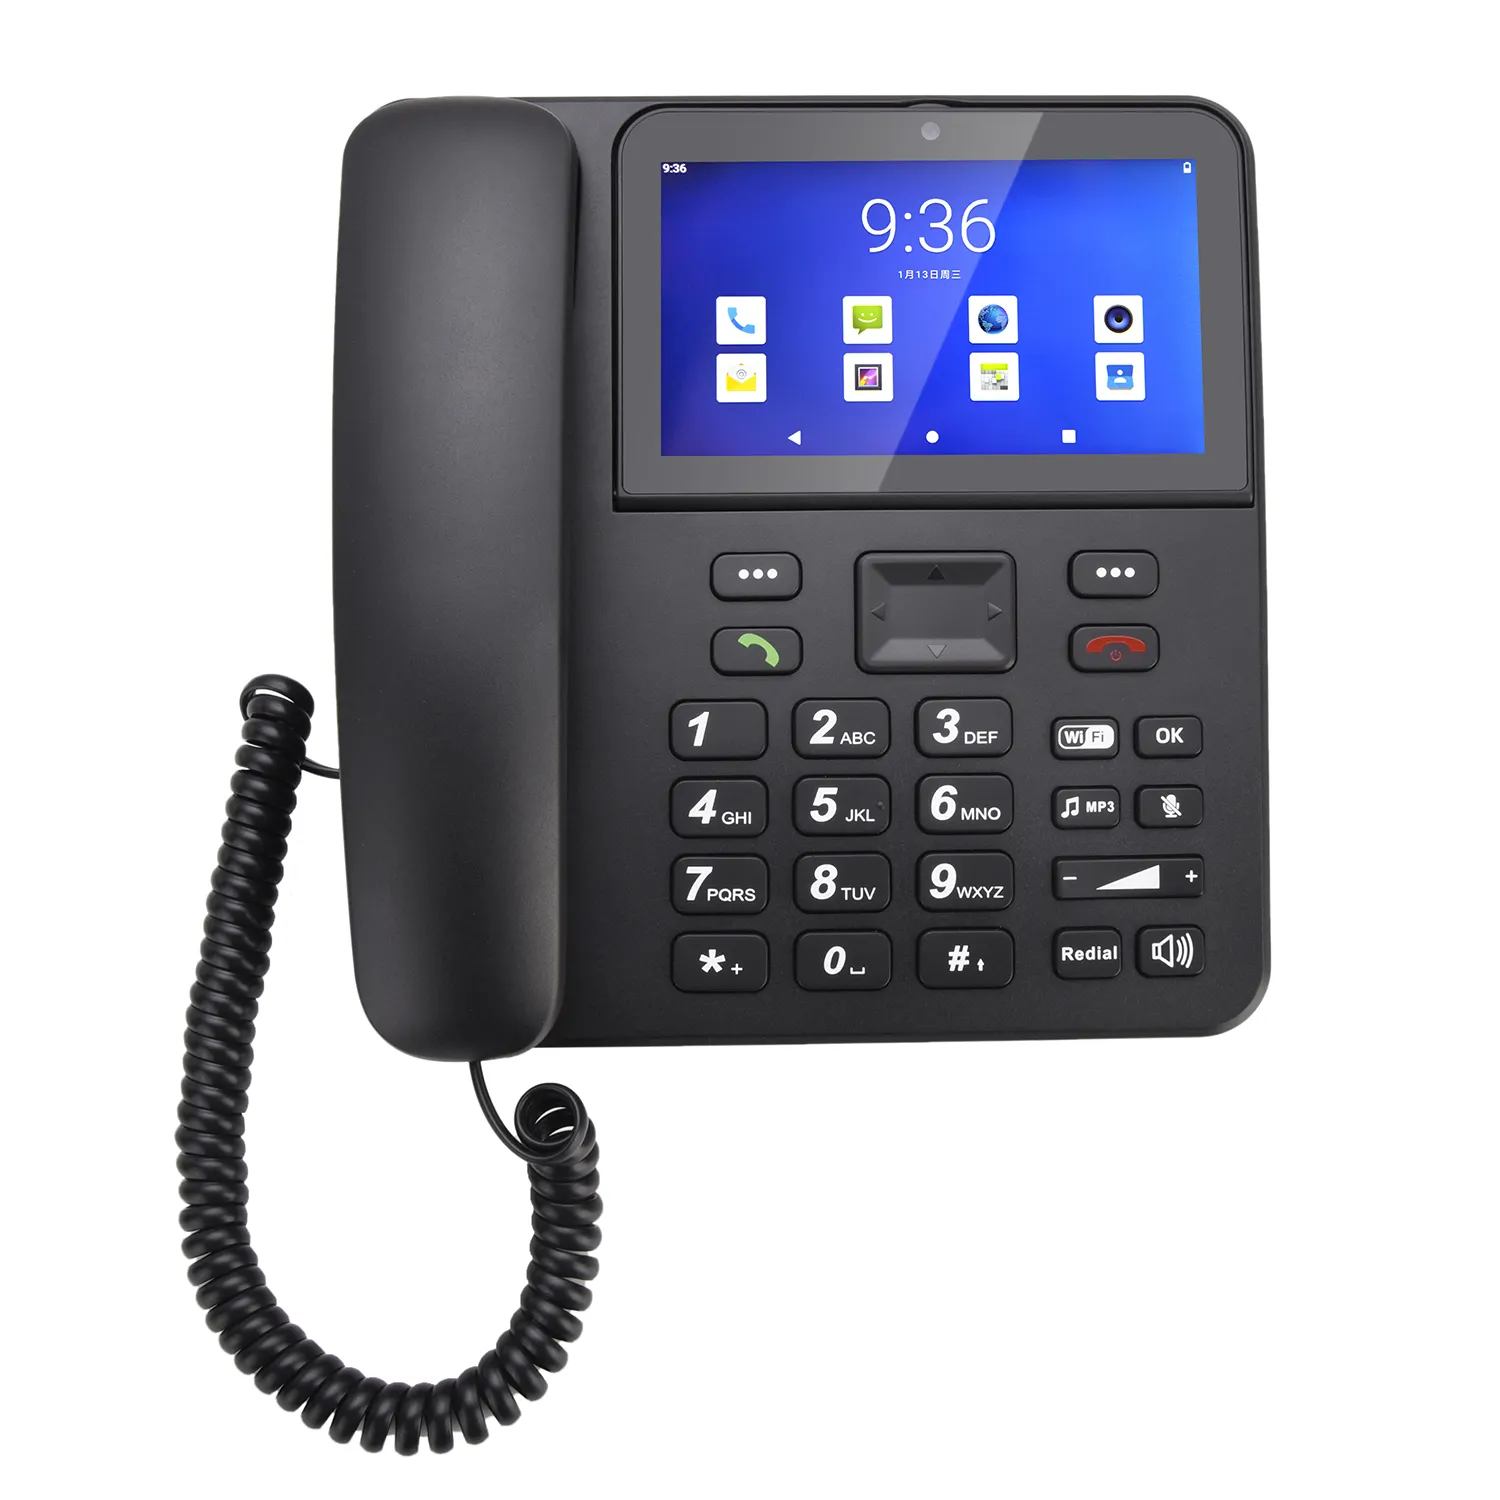 FWP LS913 4G LTE Android Video call Fixed Wireless Phone with home office wifi hotspot BT FM MP3 sim card 2G 3G